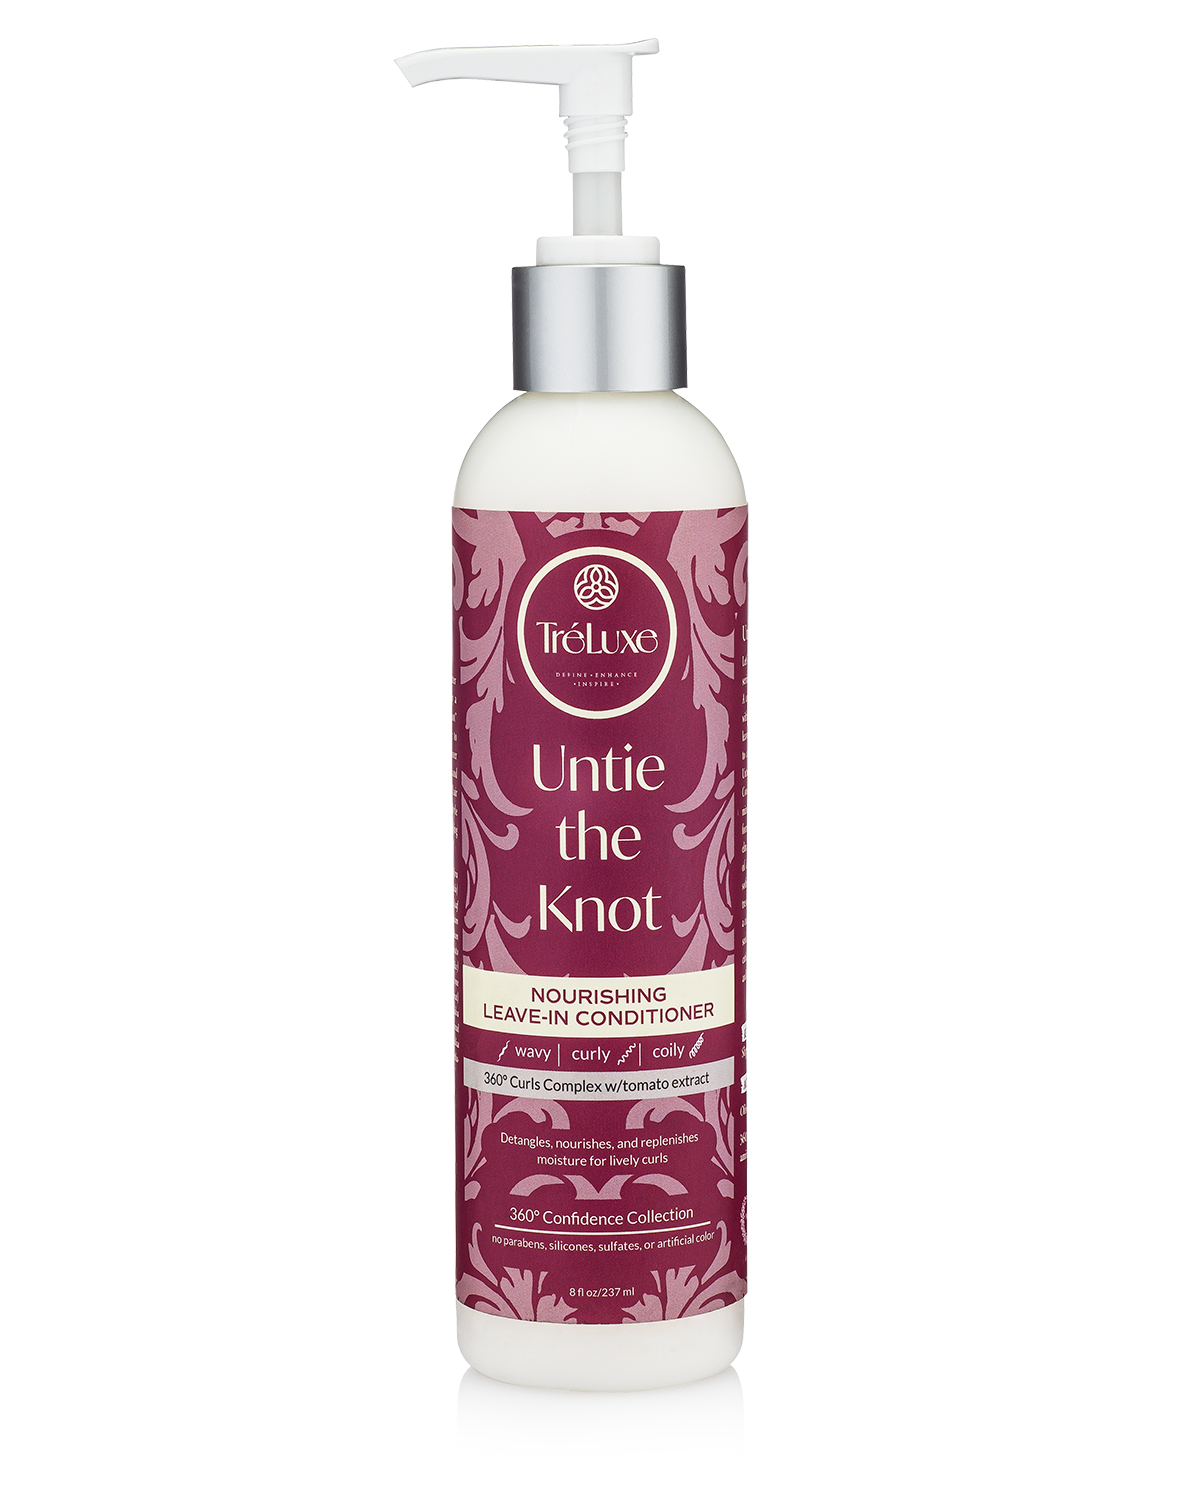 TréLuxe Untie the Knot Nourishing Leave-In Conditioner - Shop Now at Curl Warehouse